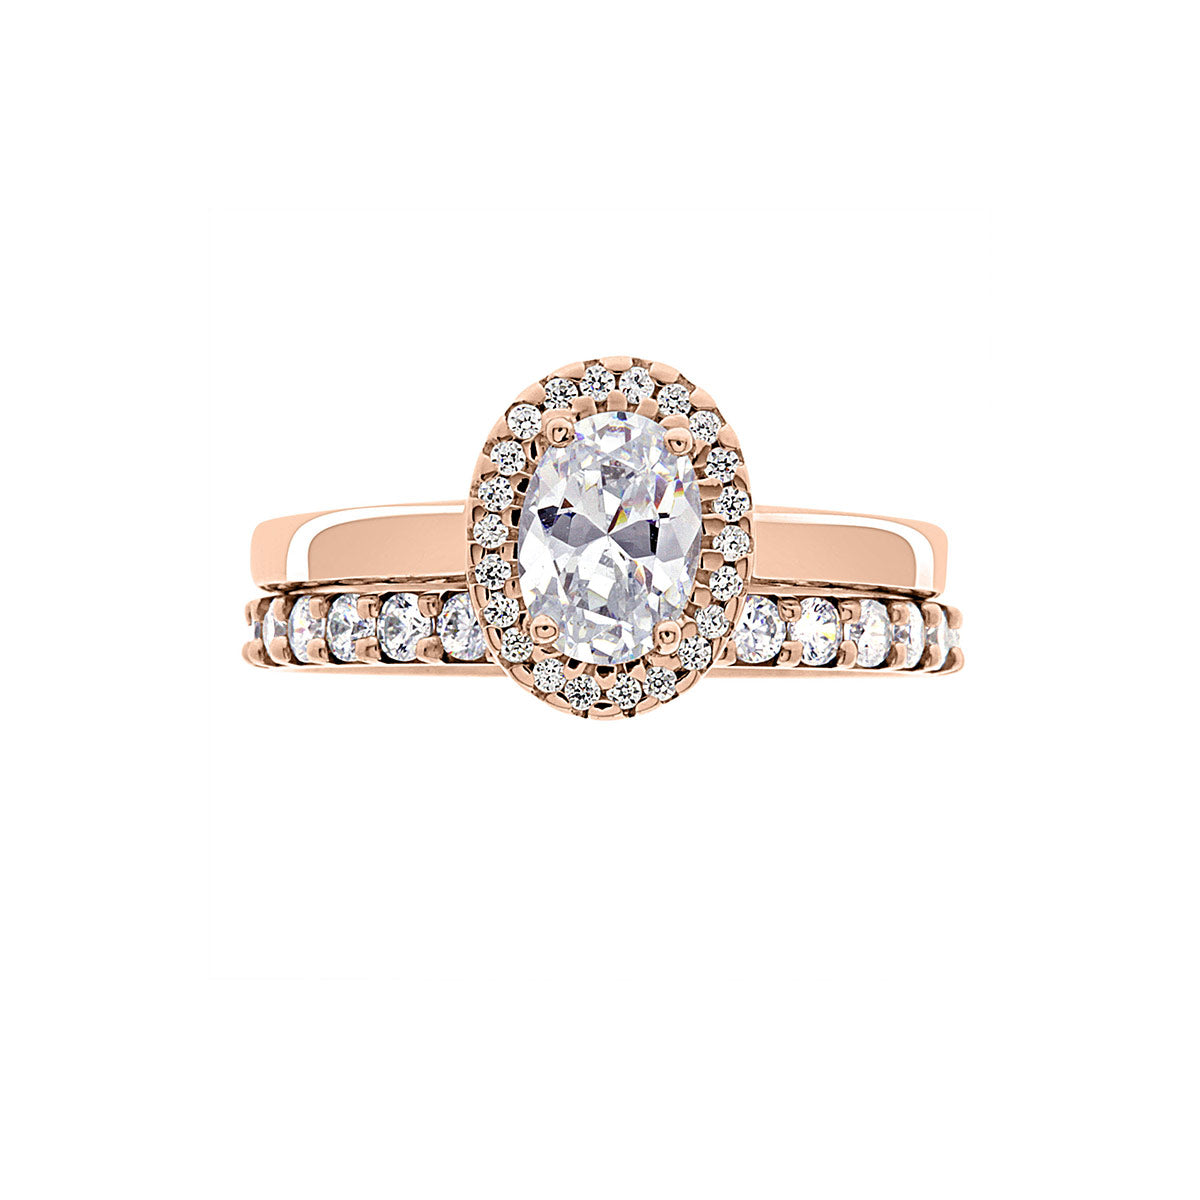 Oval Vintage Engagement Ring in rose gold pictured with a matching diamond set wedding band